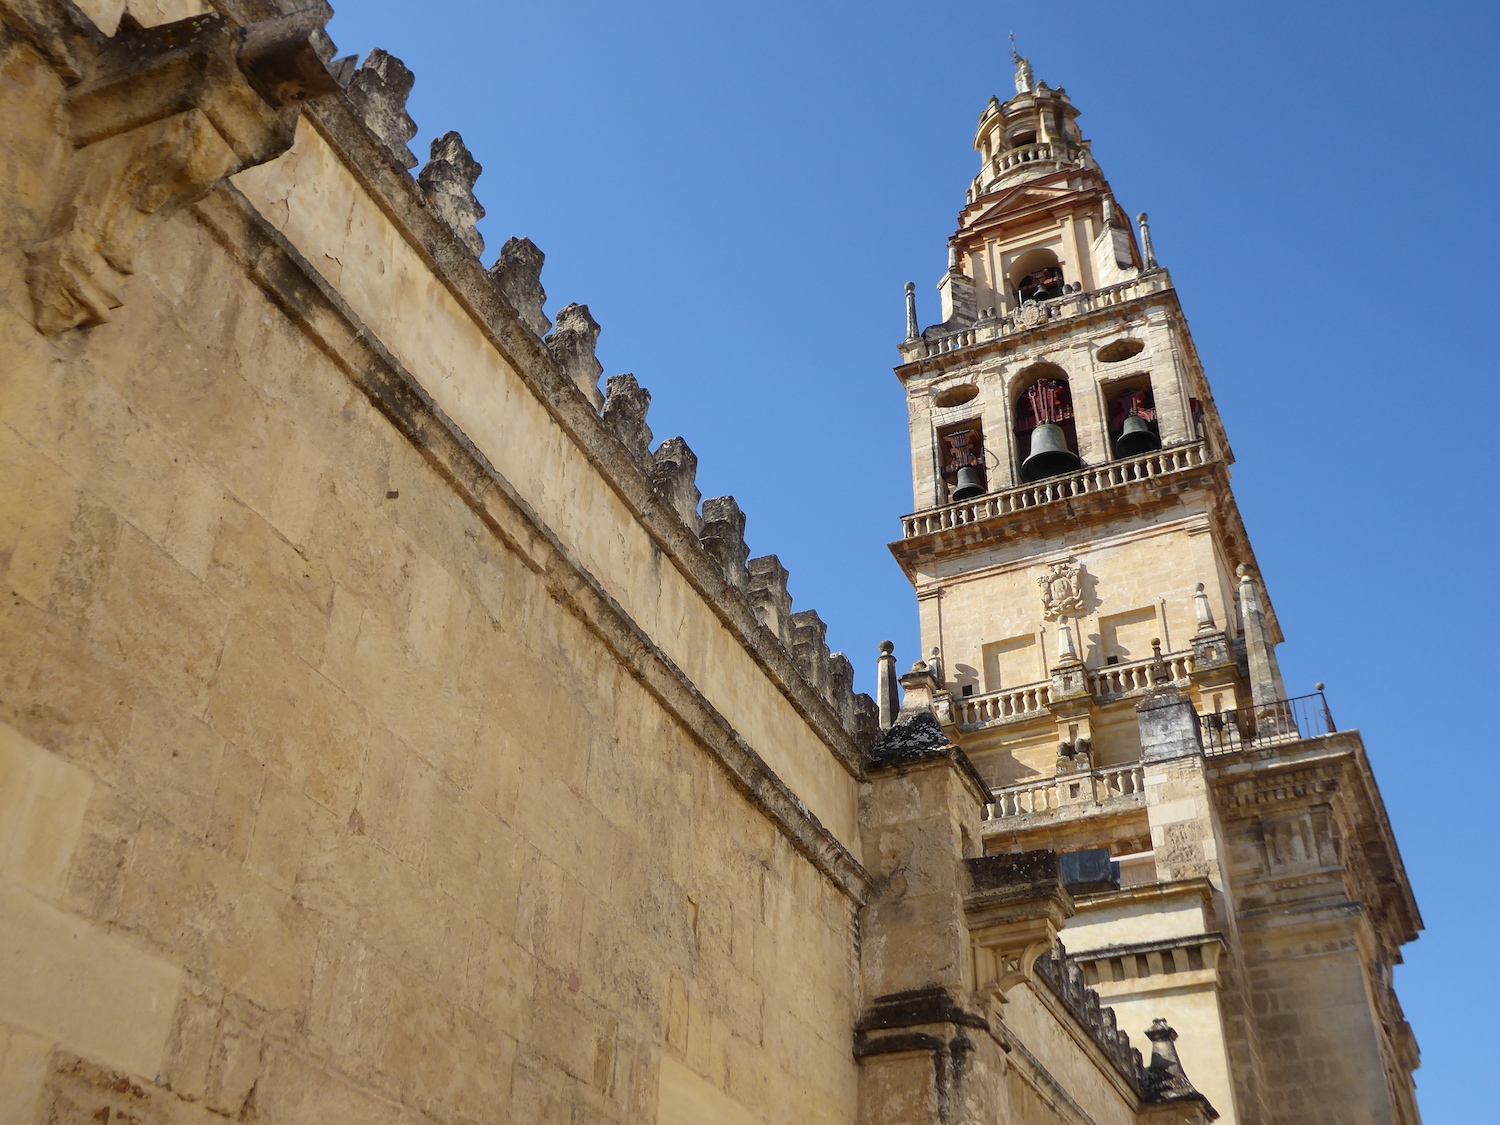 The Mezquita's bell tower was once the mosque's minaret